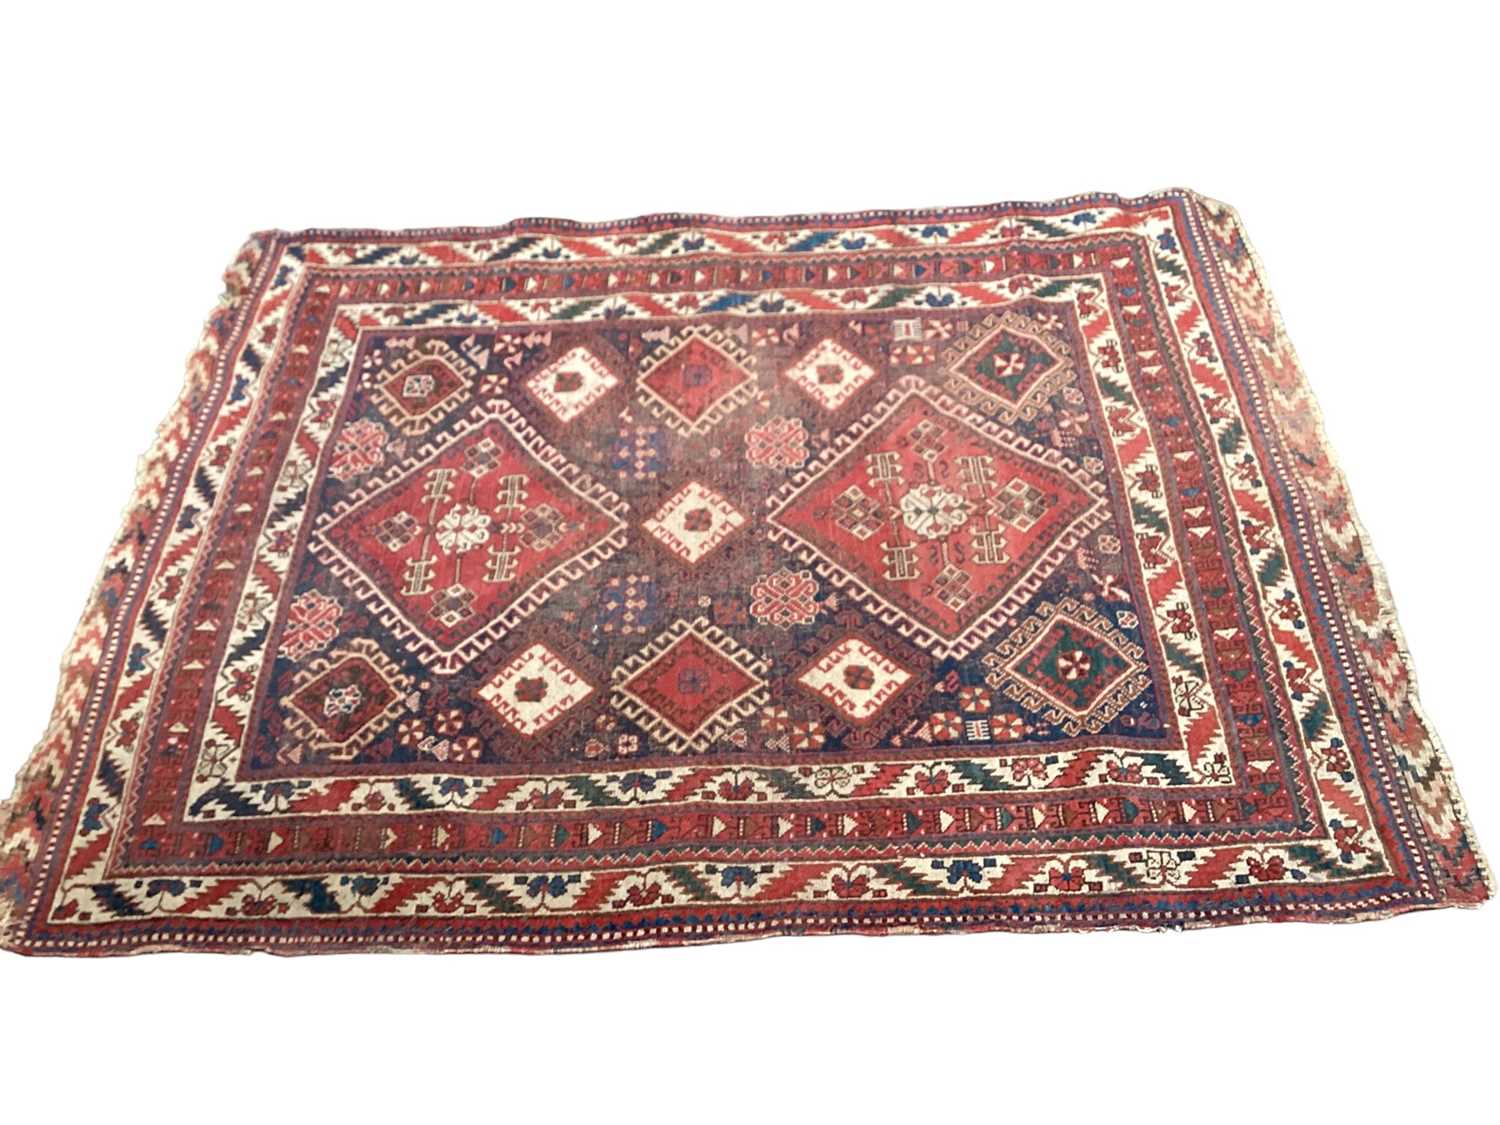 Two Eastern rugs with geometric decoration on red and blue ground, 175cm x 128cm